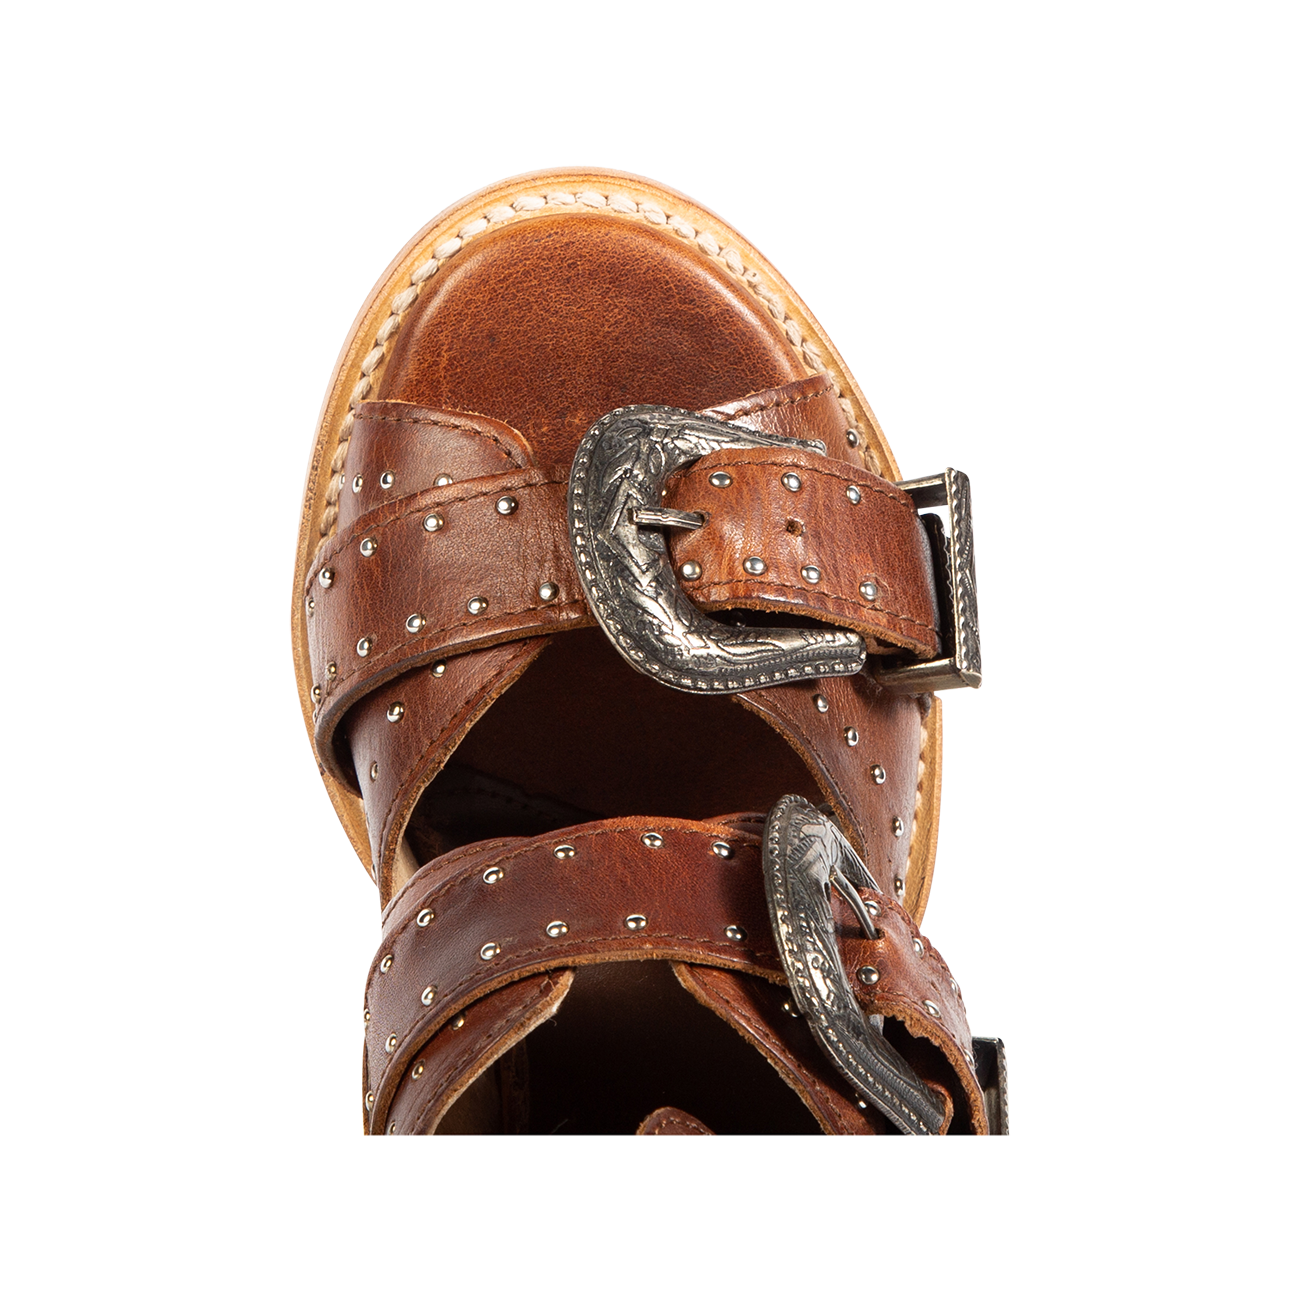 Top view showing open toe and engraved silver buckles on FREEBIRD women's Violet cognac sandal